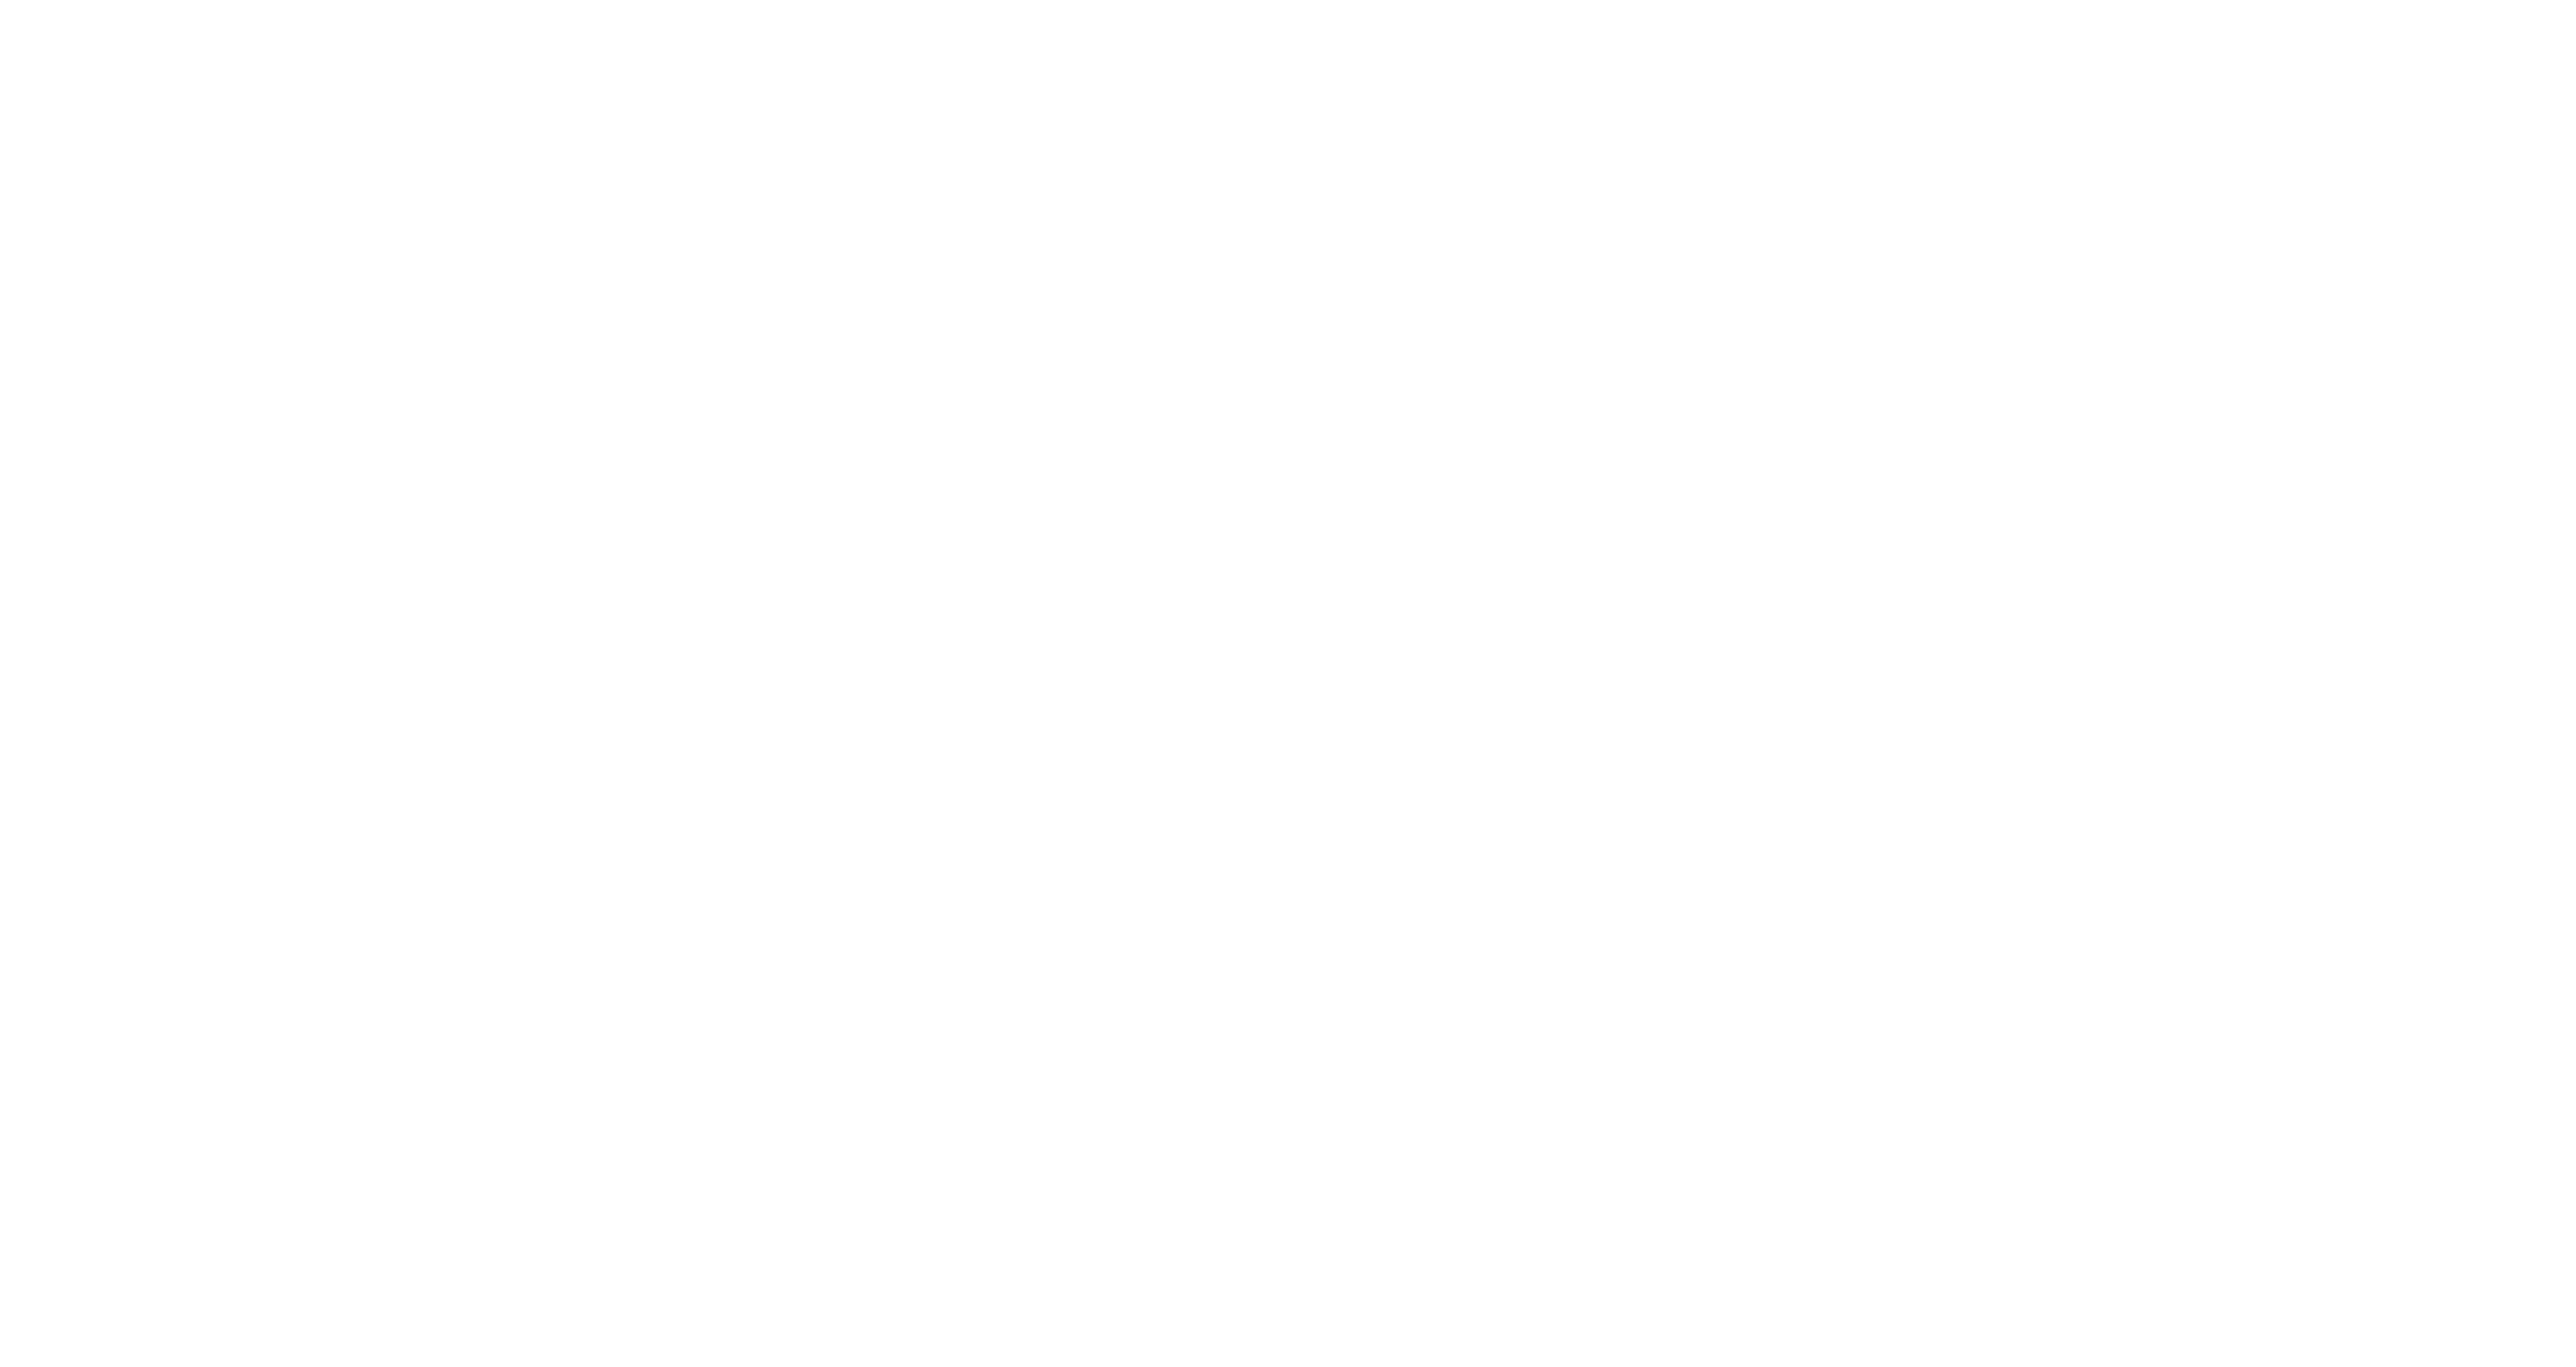 Stream Dr. Pimple Popper With Every Cystmas Card I Write discovery+